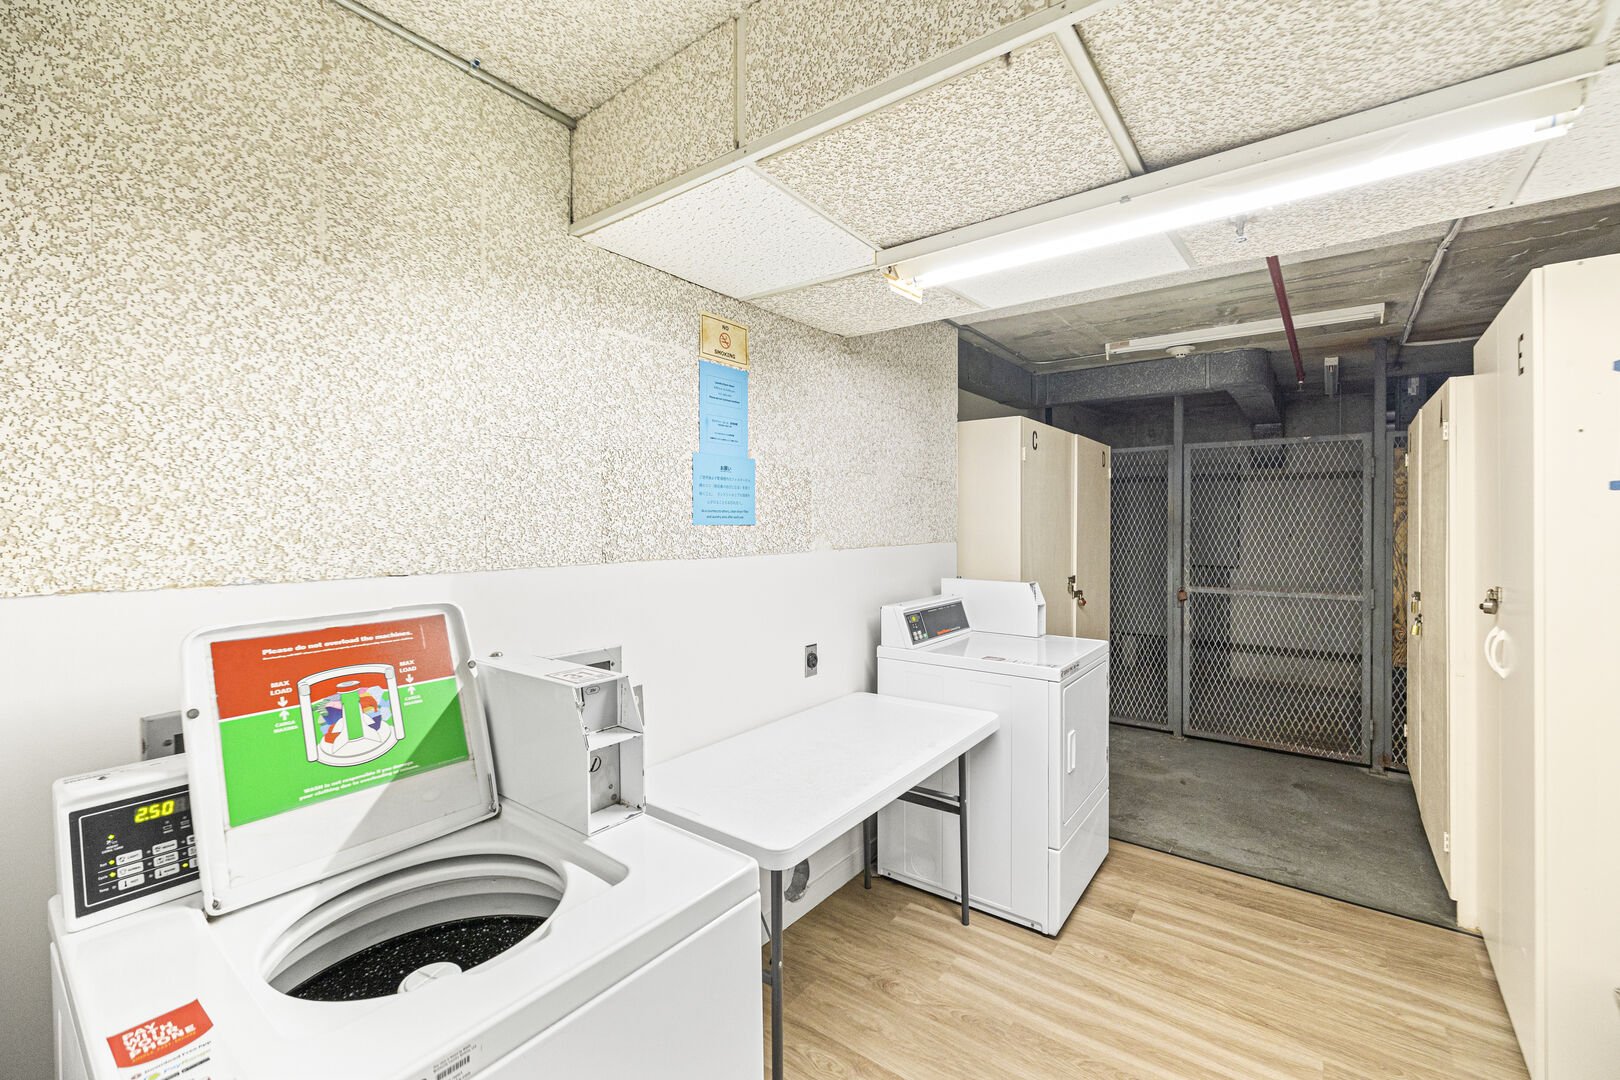 Laundry room on every floor with coin-operated washer and dryer.